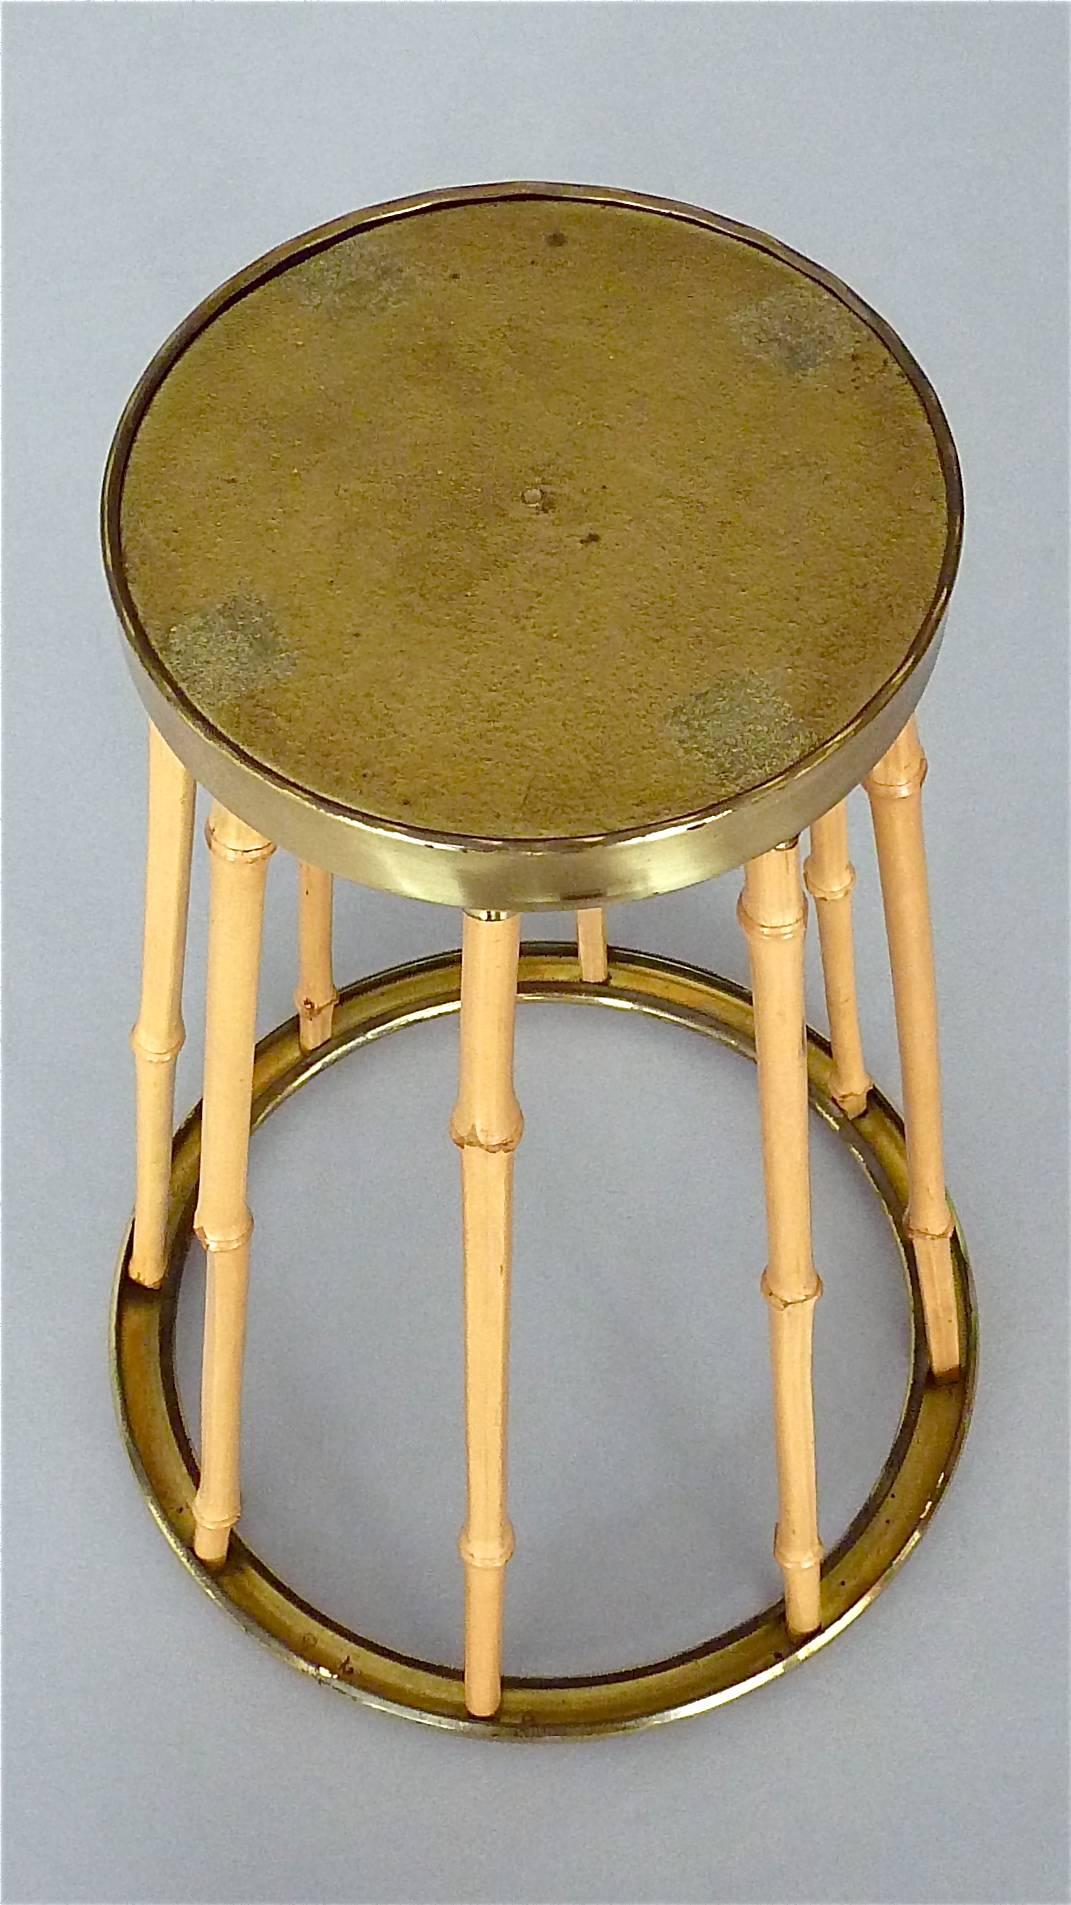 Midcentury Austrian Umbrella Stand Patinated Brass Bamboo Josef Frank Style 1950 For Sale 6